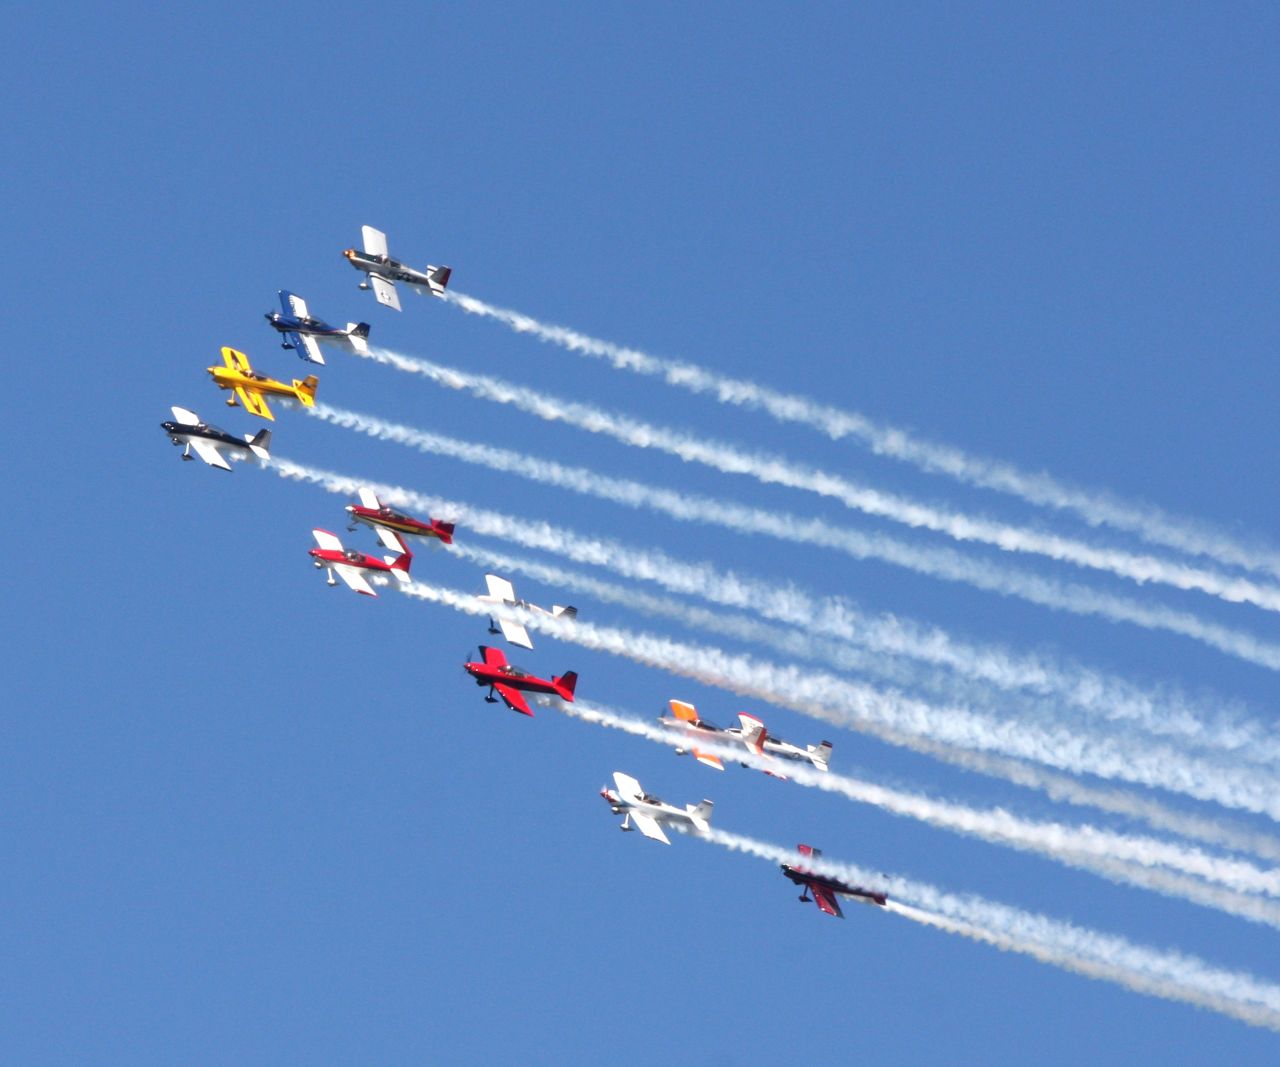 The <a href="http://www.teamrv.us/" target="_blank" target="_blank">Team RV</a> aerobatic squadron is slated to perform at this July's Oshkosh airshow. Team RV's homebuilt aircraft -- designed by Richard VanGrunsven -- perform at speeds over 200 mph while pulling g-forces up to 6 times normal gravity.